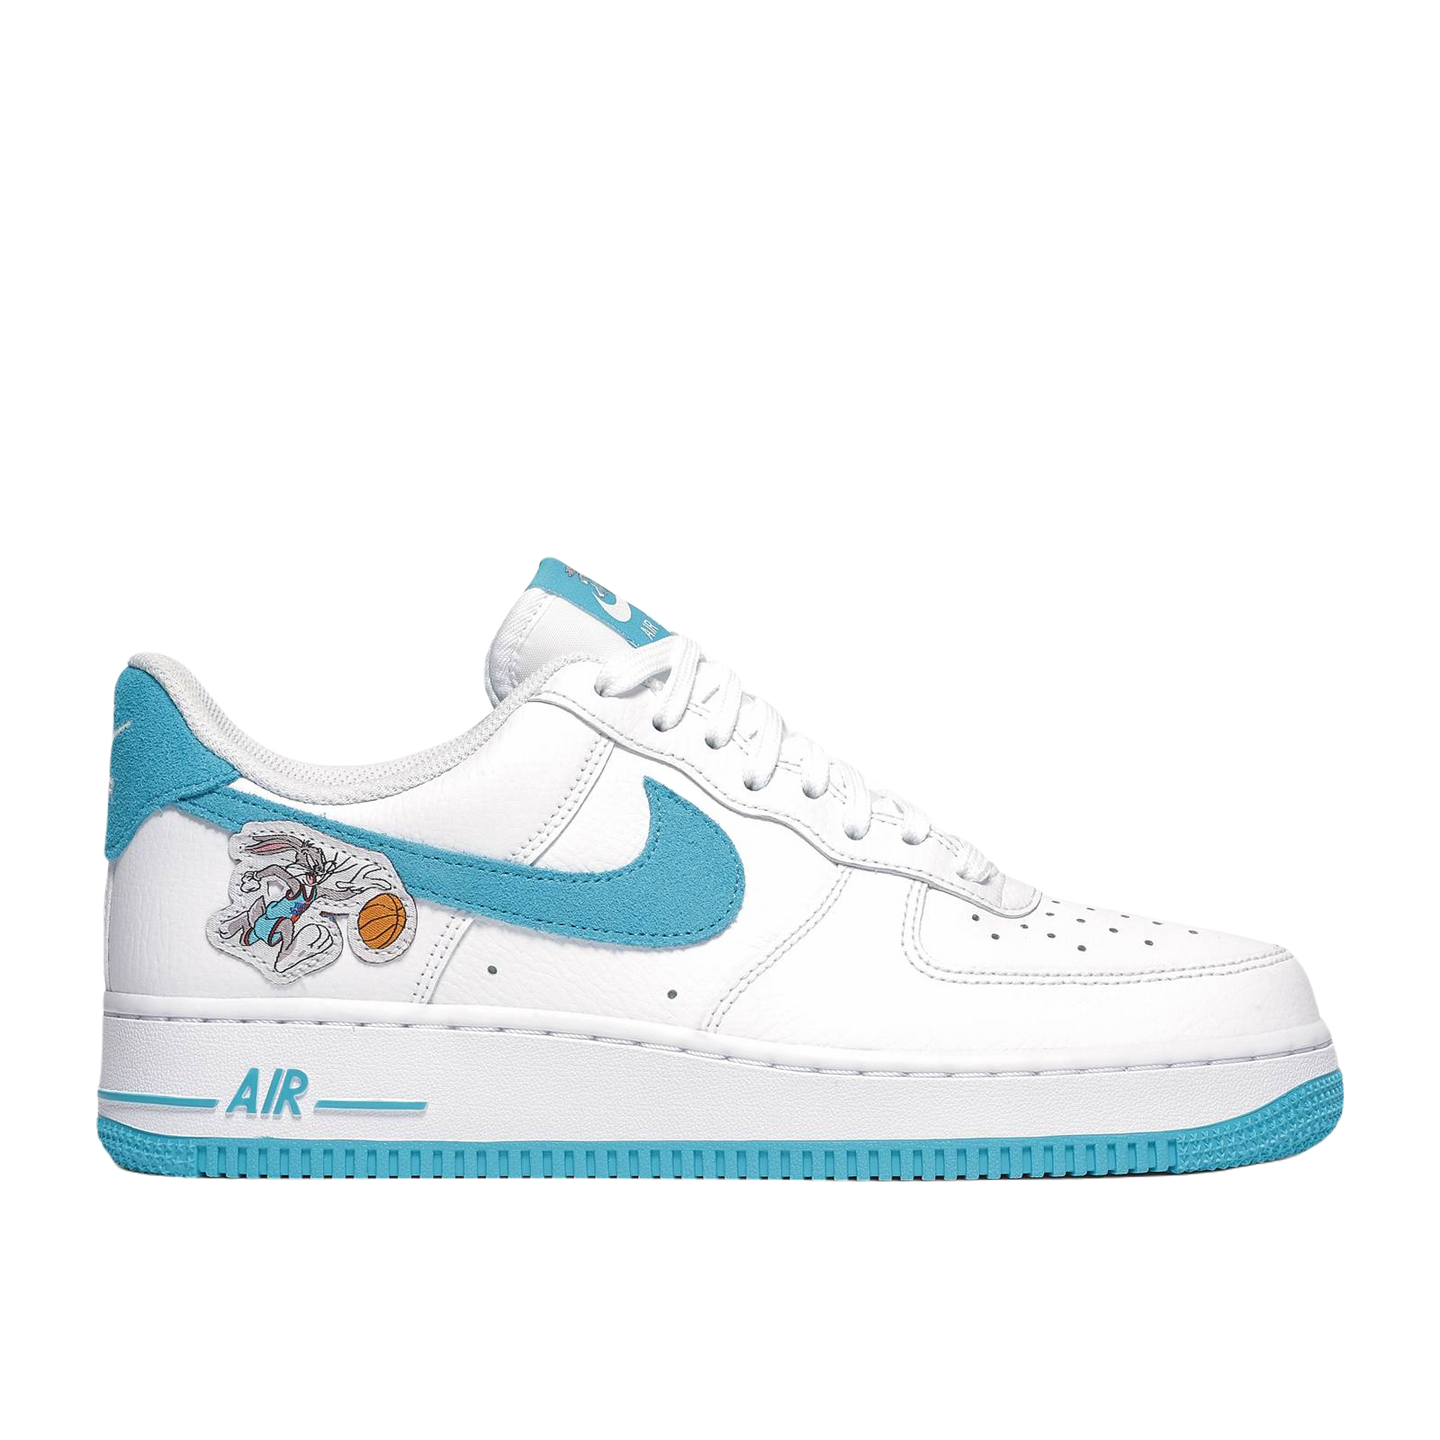 Air Force 1 '07 Low x Space Jam - Hare